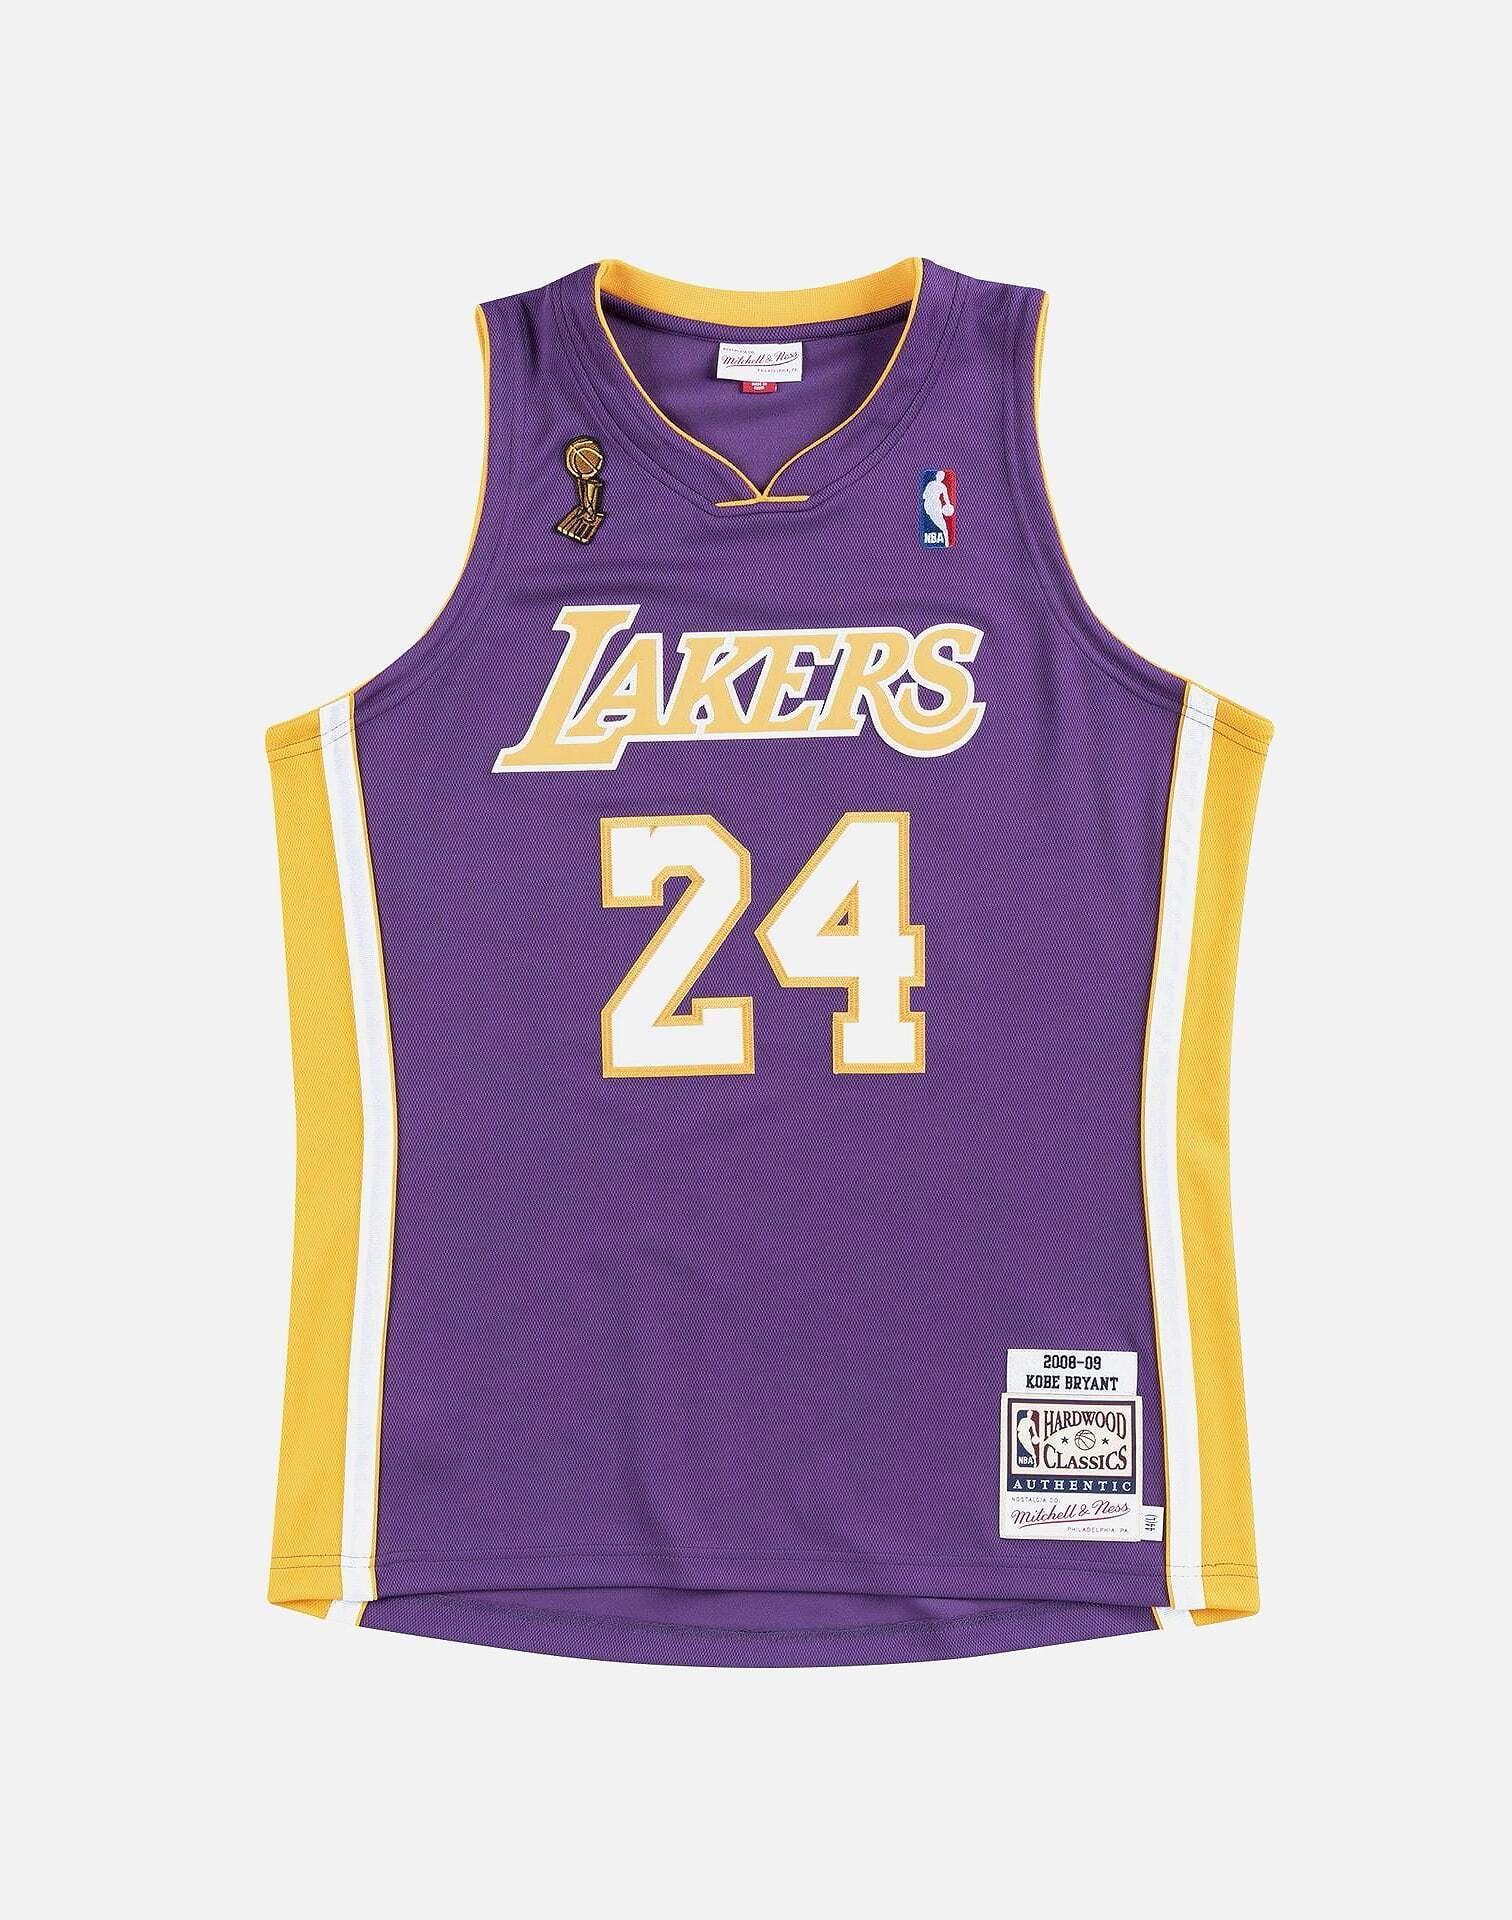 100% Authentic Pre Owned Lakers Kobe Bryant Jersey - Depop